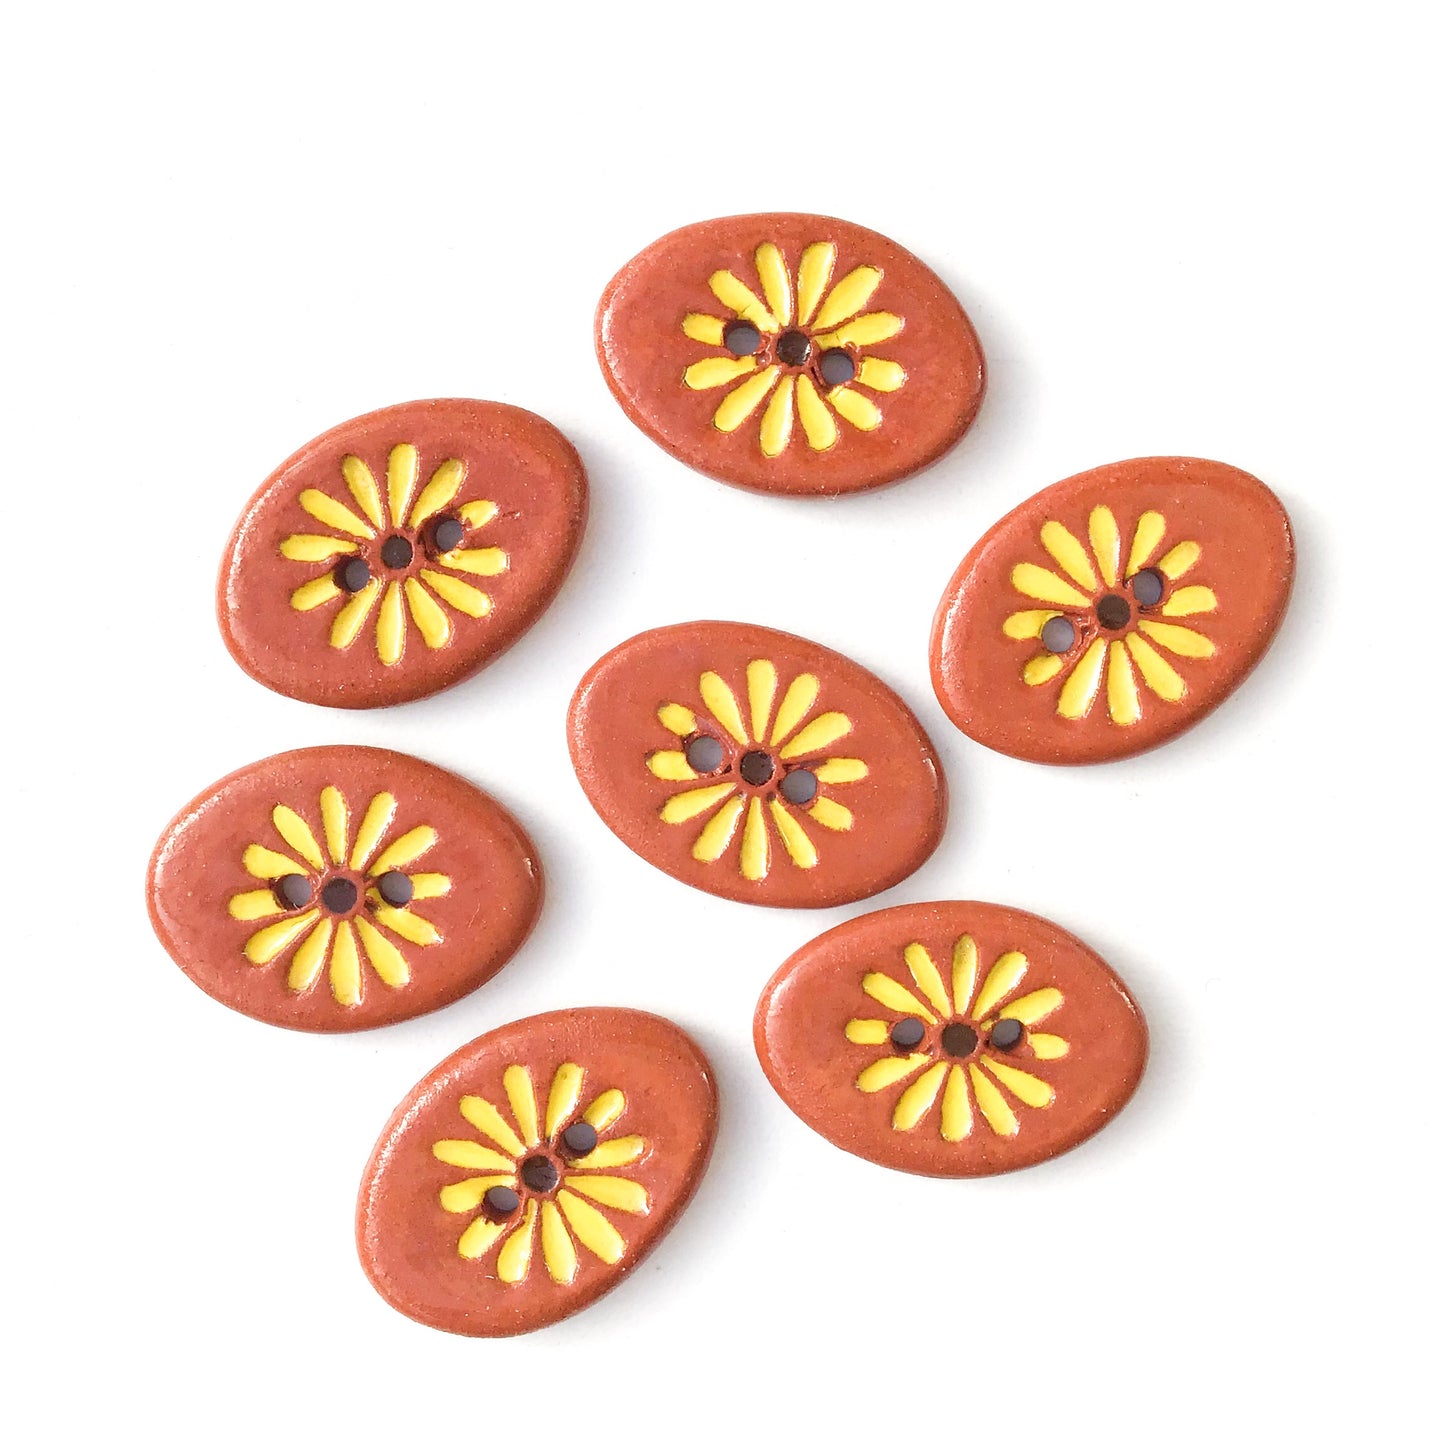 Yellow Daisy Button on Red Clay - Ceramic Flower Buttons - 5/8" x 7/8" - 7 Pack (ws-280)